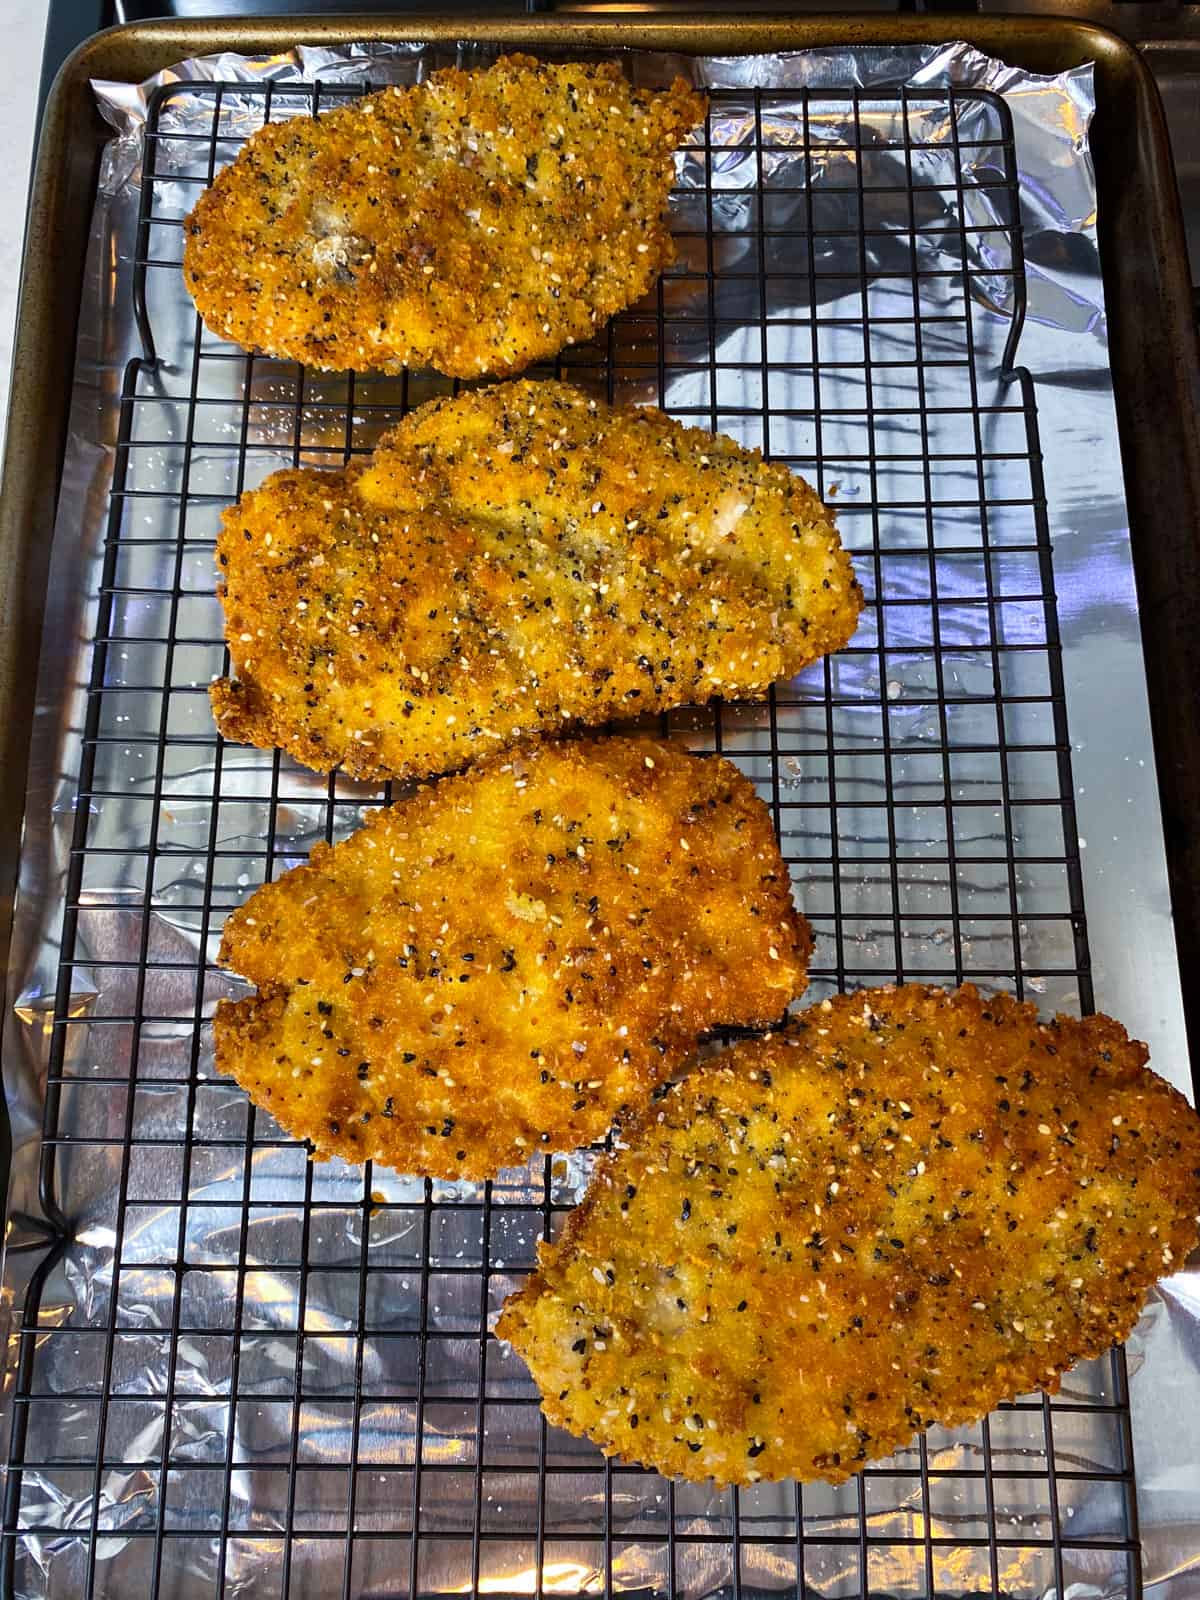 Drain the fried chicken cutlets on a wire rack.